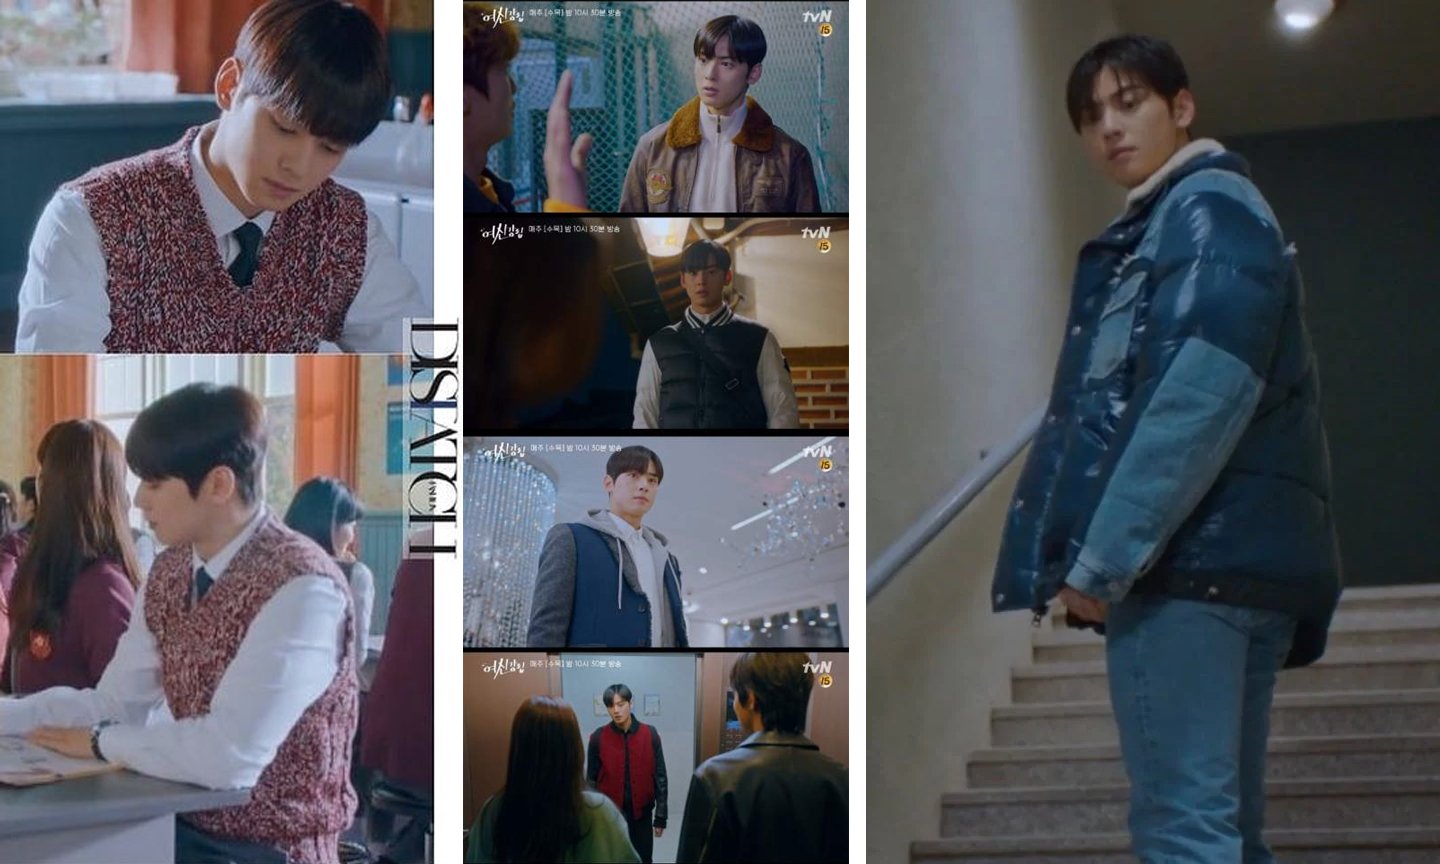 Netizens say that Cha Eun Woo's 'True Beauty' stylist is dressing him up like an ahjussi (middle-aged man) going through a midlife crisis